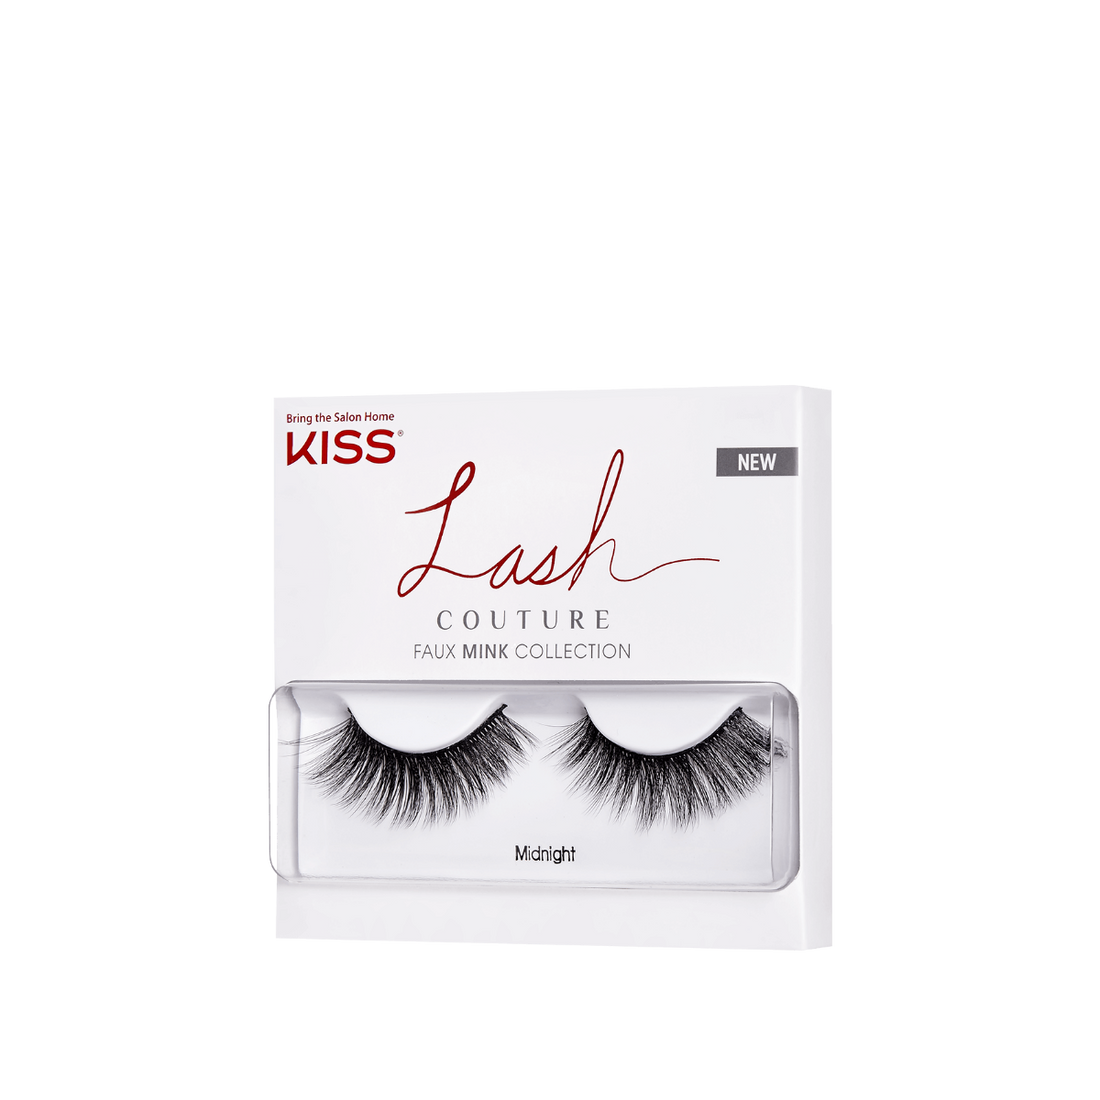 KISS Lash Couture Perfect Match - Midnight + Adhesive